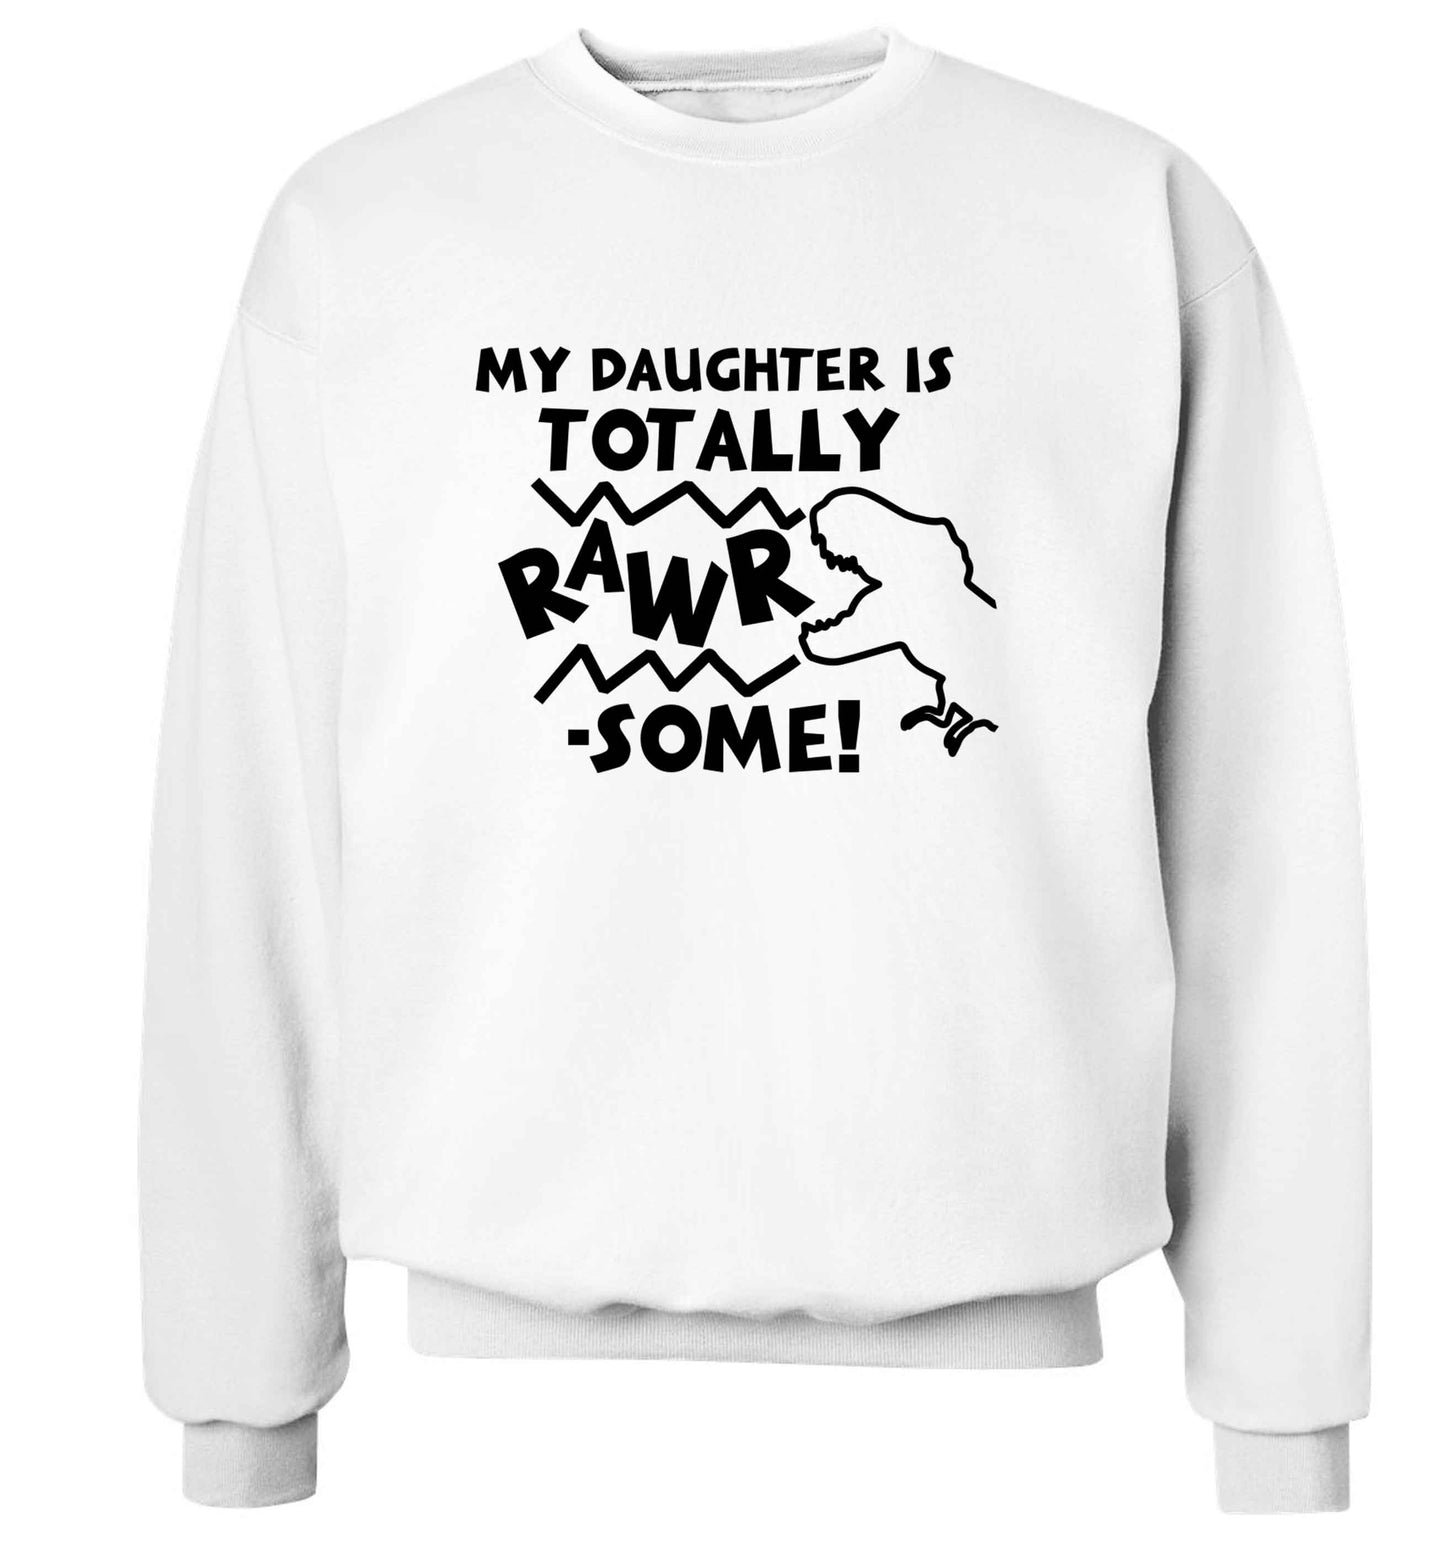 My daughter is totally rawrsome adult's unisex white sweater 2XL